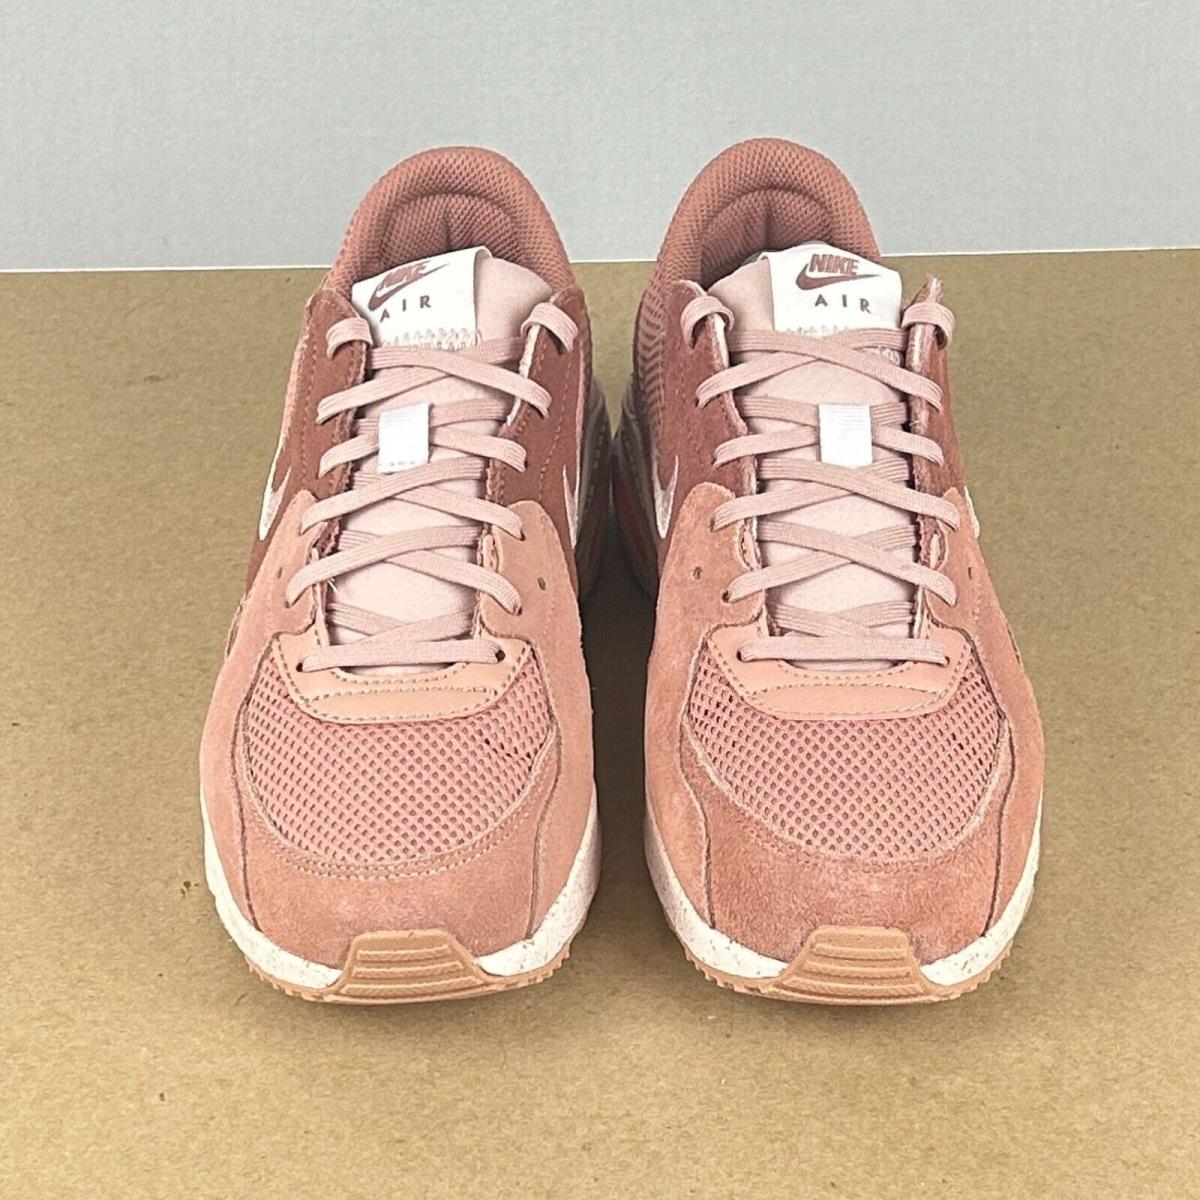 Nike Air Max Excee Rose Whisper Pink Oxford Athletic Shoes Womens 7.5 Low - Pink